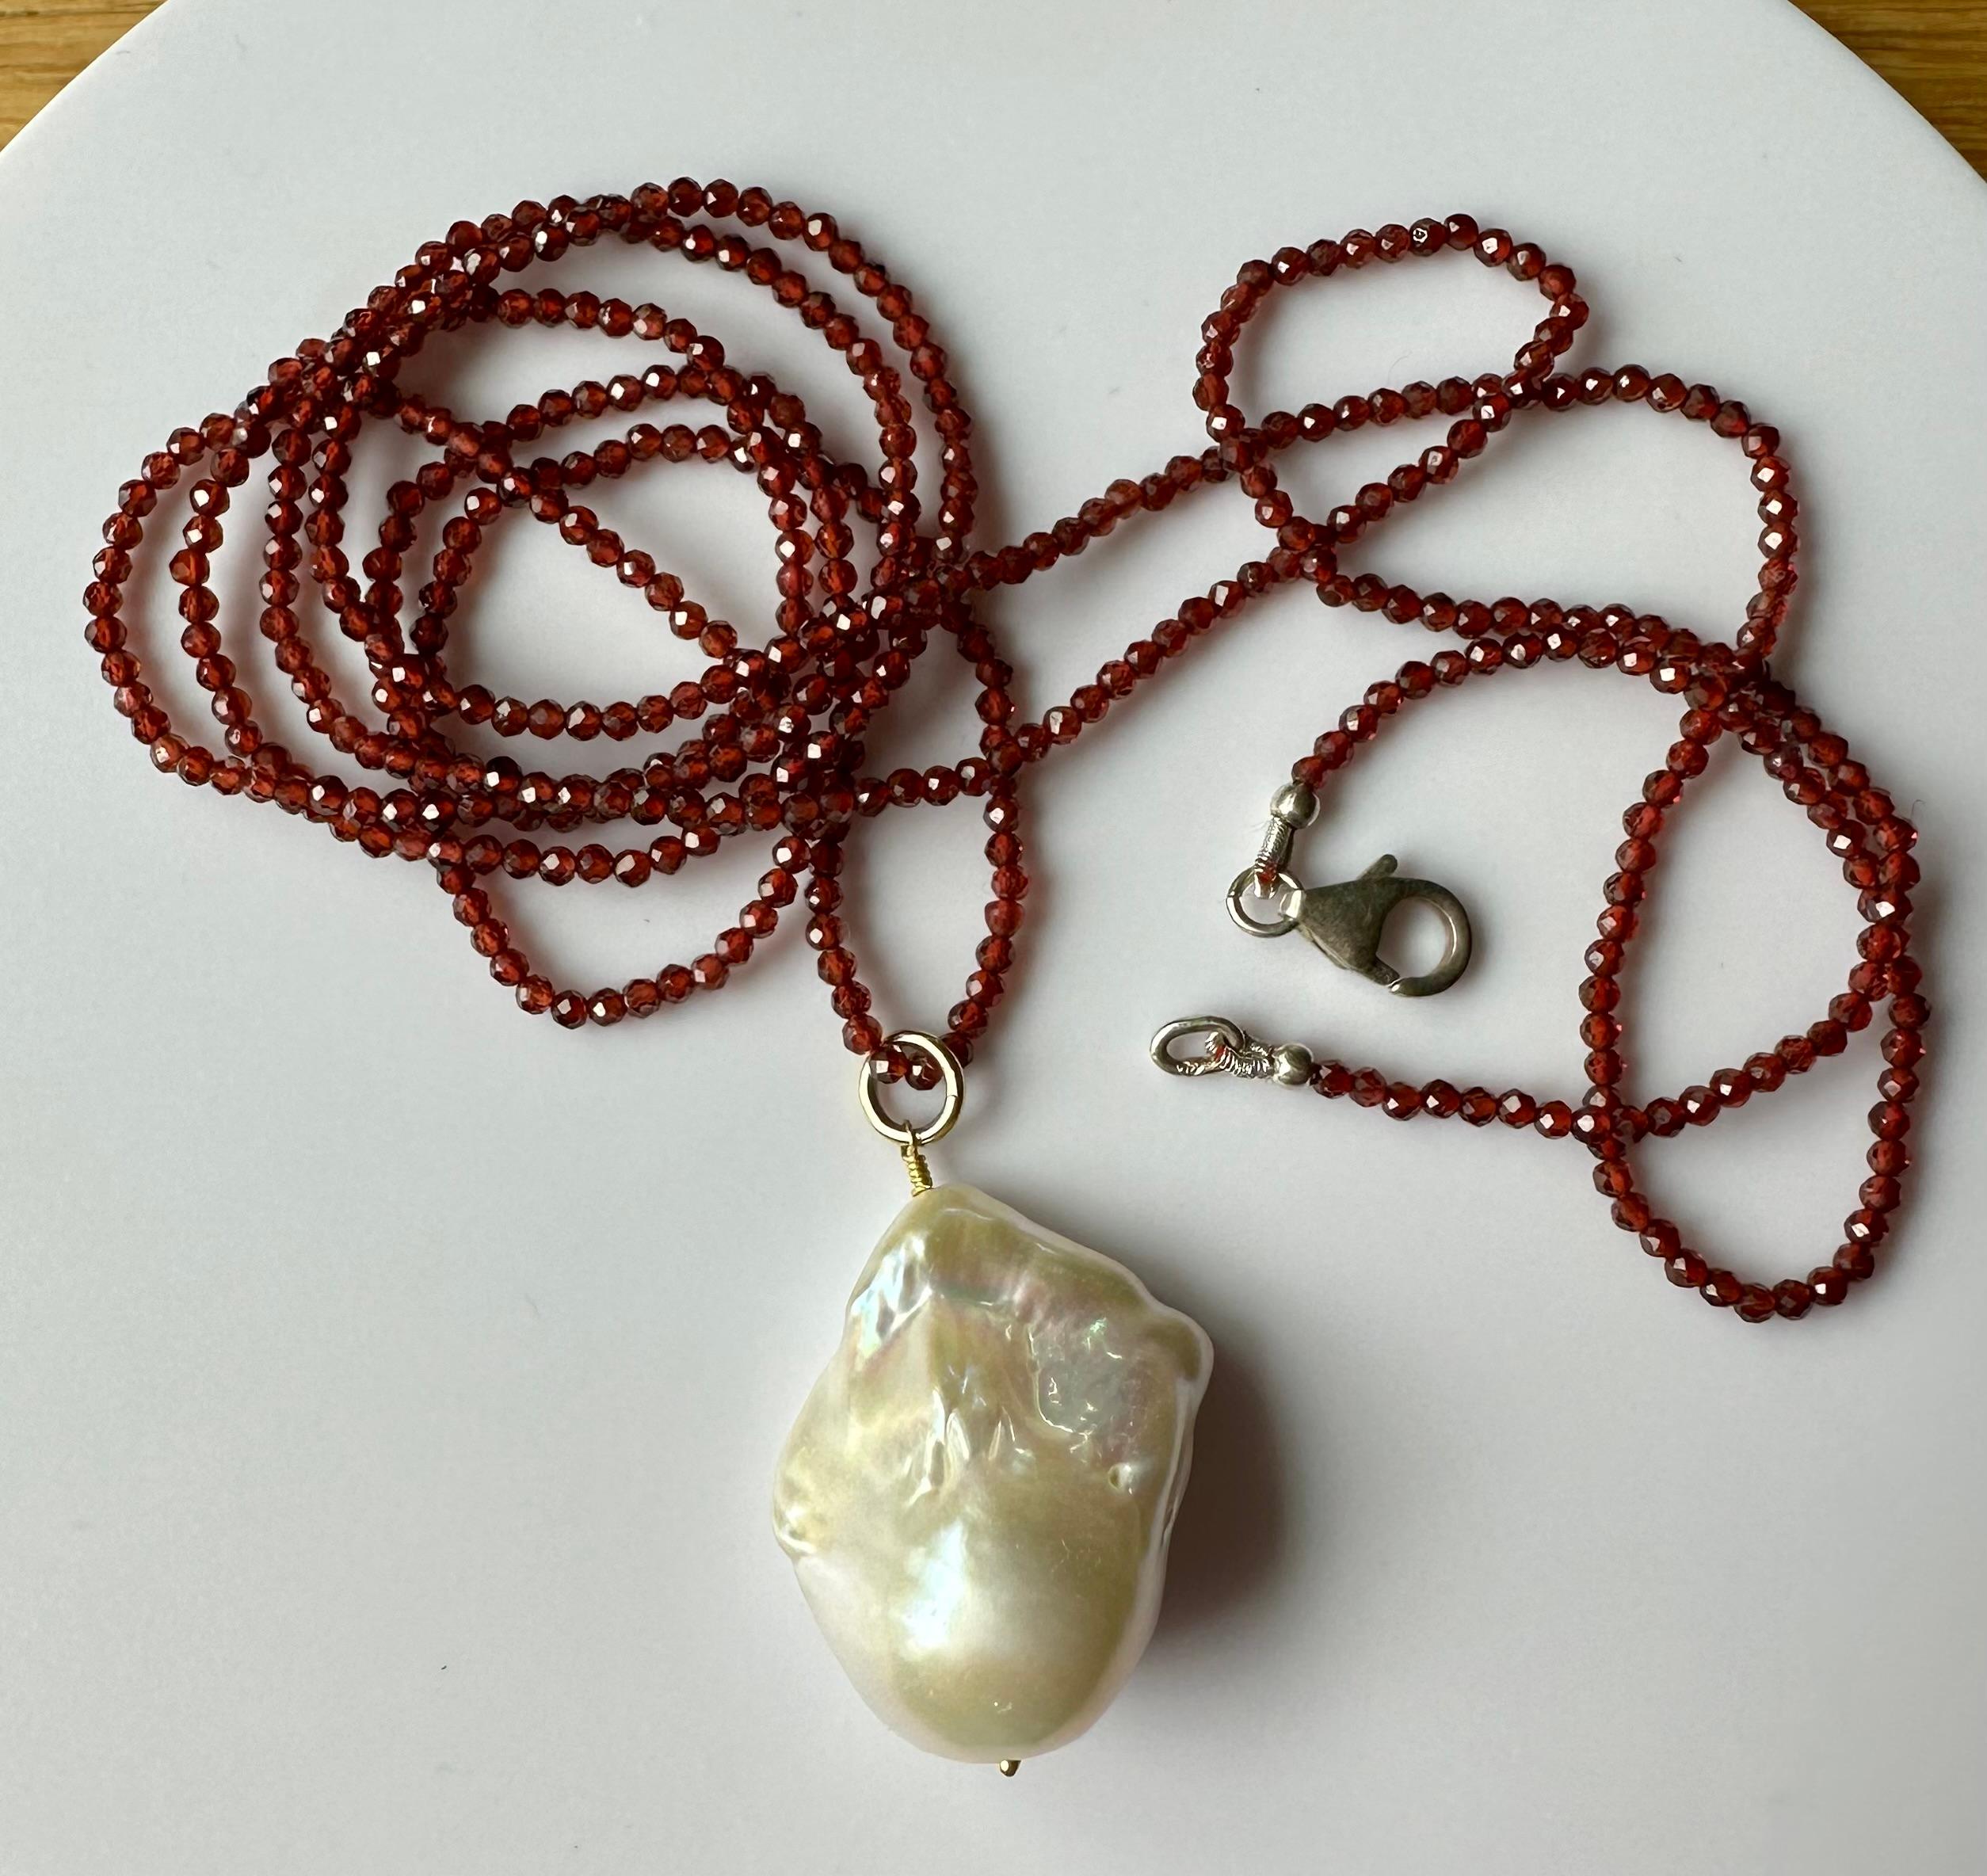 A large lovely Pearlescent Baroque Pearl Pendant hanging from a 24 Inch Beaded Garnet Necklace. The faceted Garnet Beads scintillate and sparkle as the light plays over their facets. This lovely Baroque South Sea Pearl has amazing luster and shows